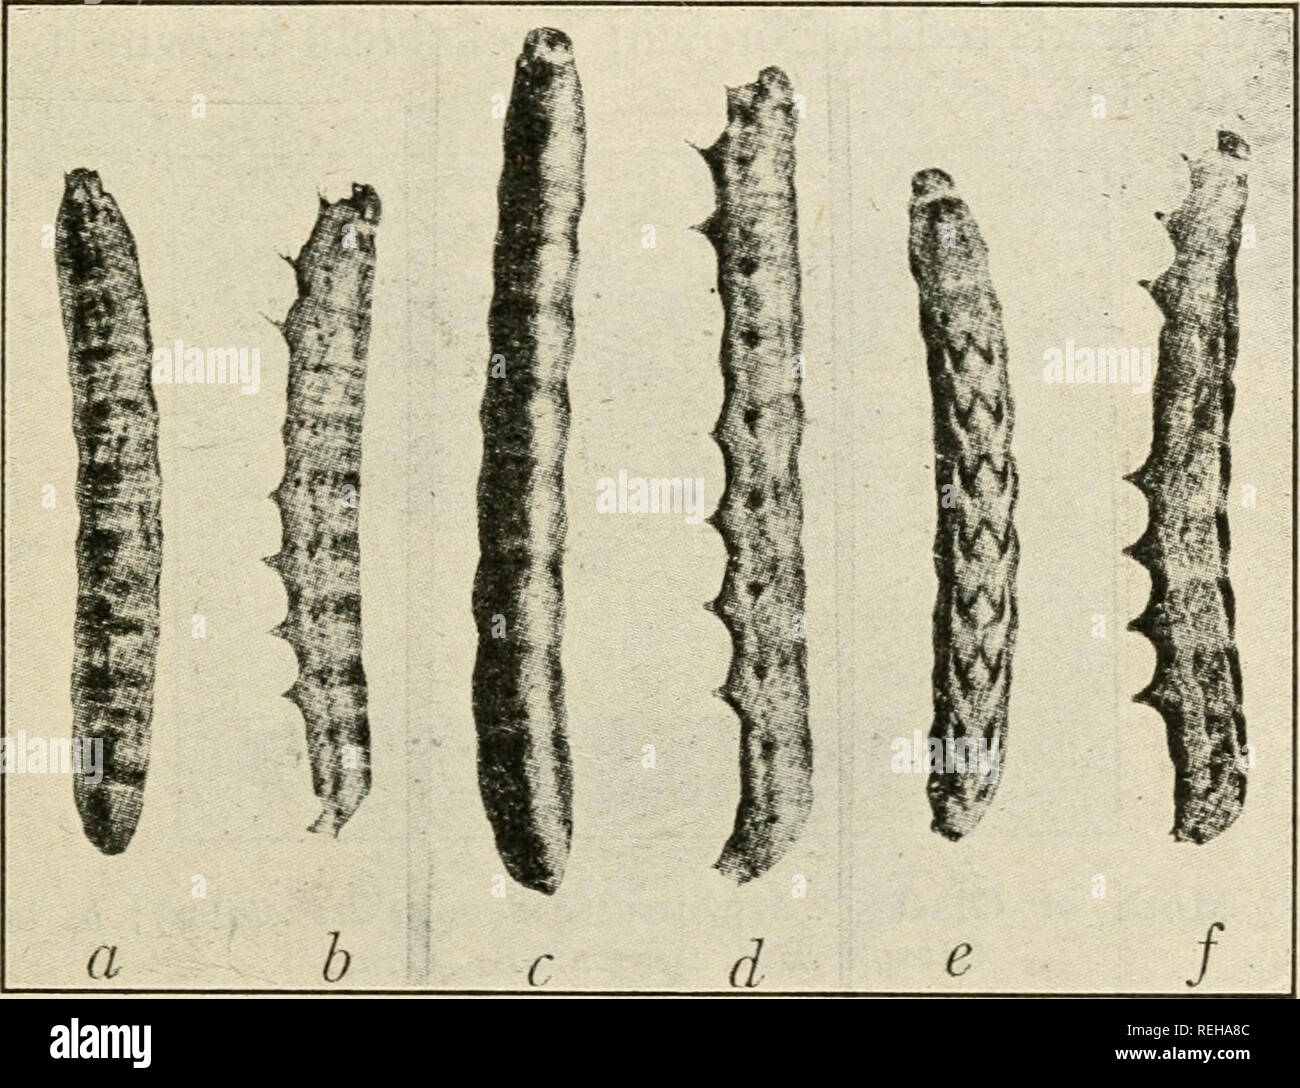 . Class book of economic entomology. Insects, Injurious and beneficial. [from old catalog]; Insects; Insects. CLASSIFICATION AND DESCRIPTION OF COMMON INSECTS 187 back; tubercles blackish, each with a single hair; head and shield shiny and grey. Active in May and June on fruits and garden vegetables. Sometimes called the ''onion cutworm.&quot; Common Striped Cutworm (Euxoa tessellata Harris).—This cutworm is 13^ inches long, grey, with a pale median dorsal line and three pale lines on each side. It feeds on most vegetable crops. One brood a year; passes the winter as half-grown larva, and is m Stock Photo